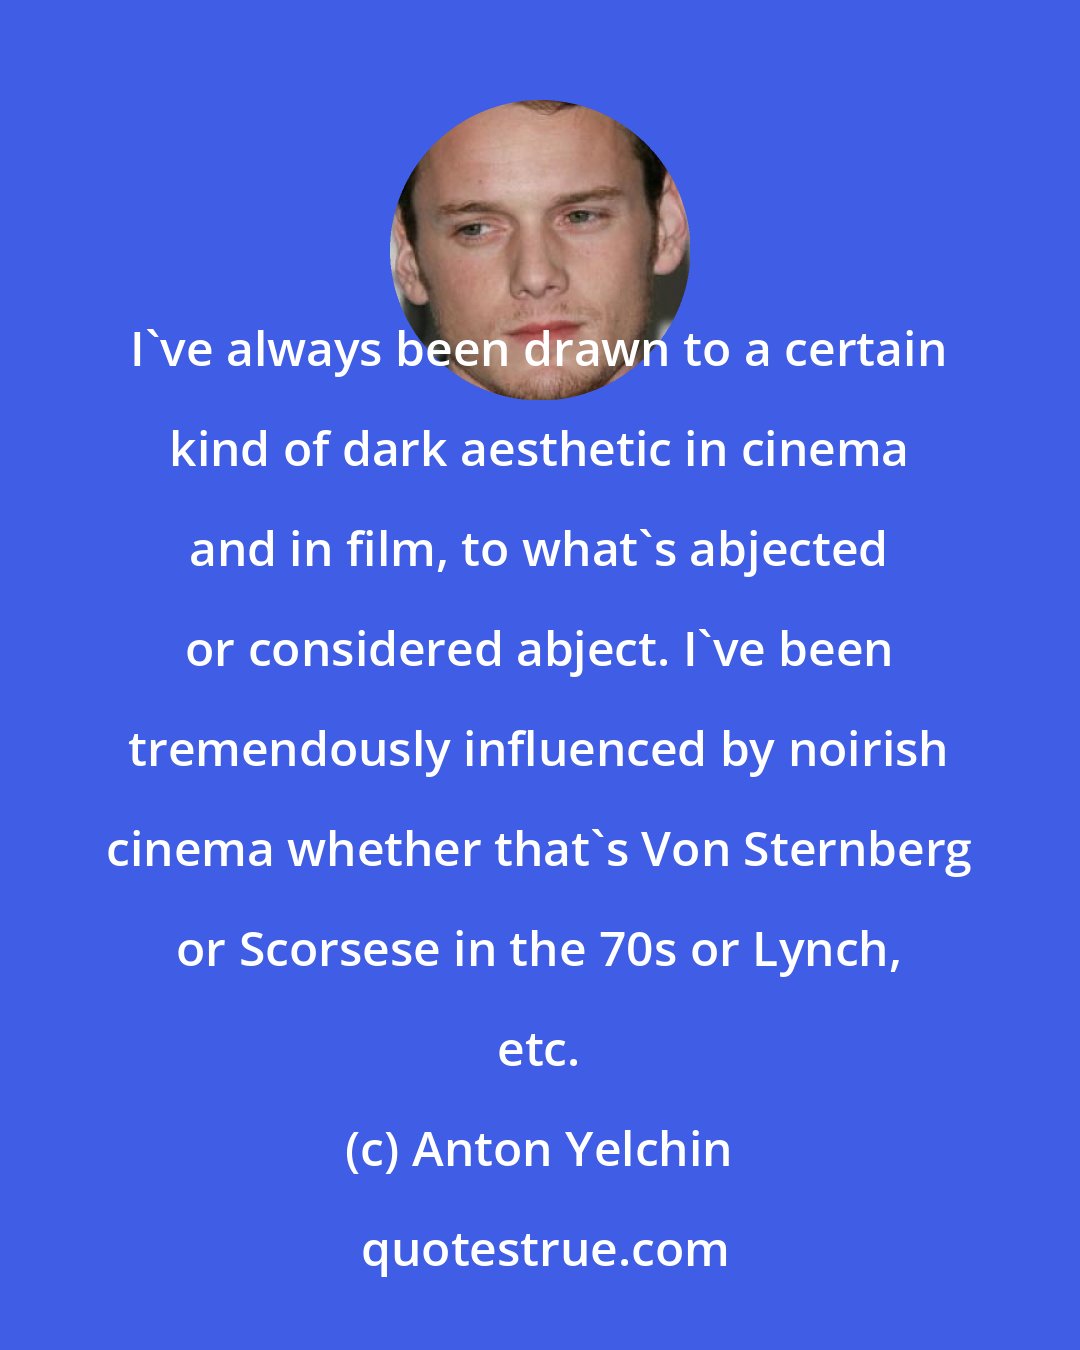 Anton Yelchin: I've always been drawn to a certain kind of dark aesthetic in cinema and in film, to what's abjected or considered abject. I've been tremendously influenced by noirish cinema whether that's Von Sternberg or Scorsese in the 70s or Lynch, etc.